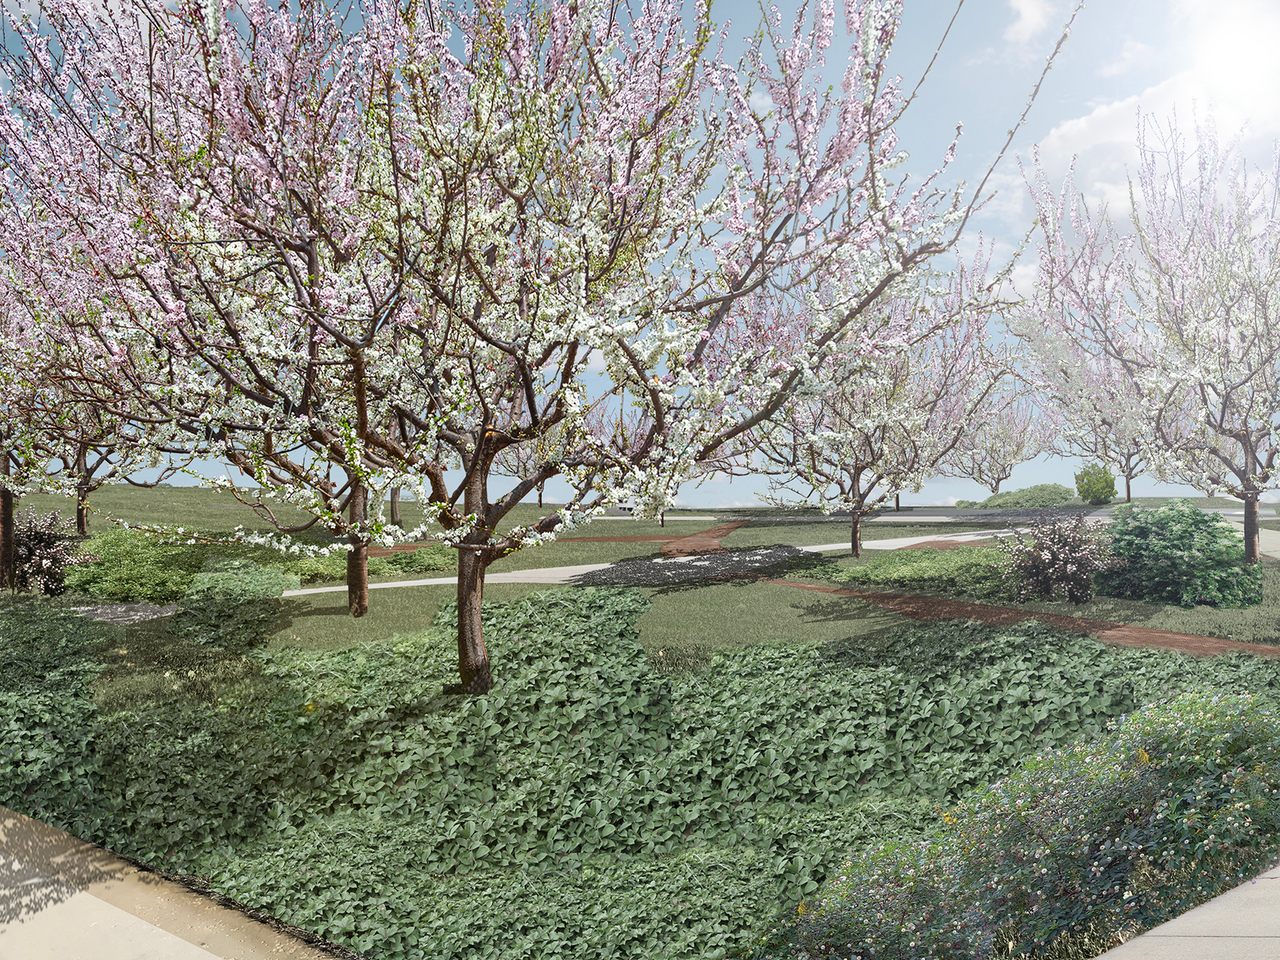 An artist rendering of the Open Orchard on Governor's Island.